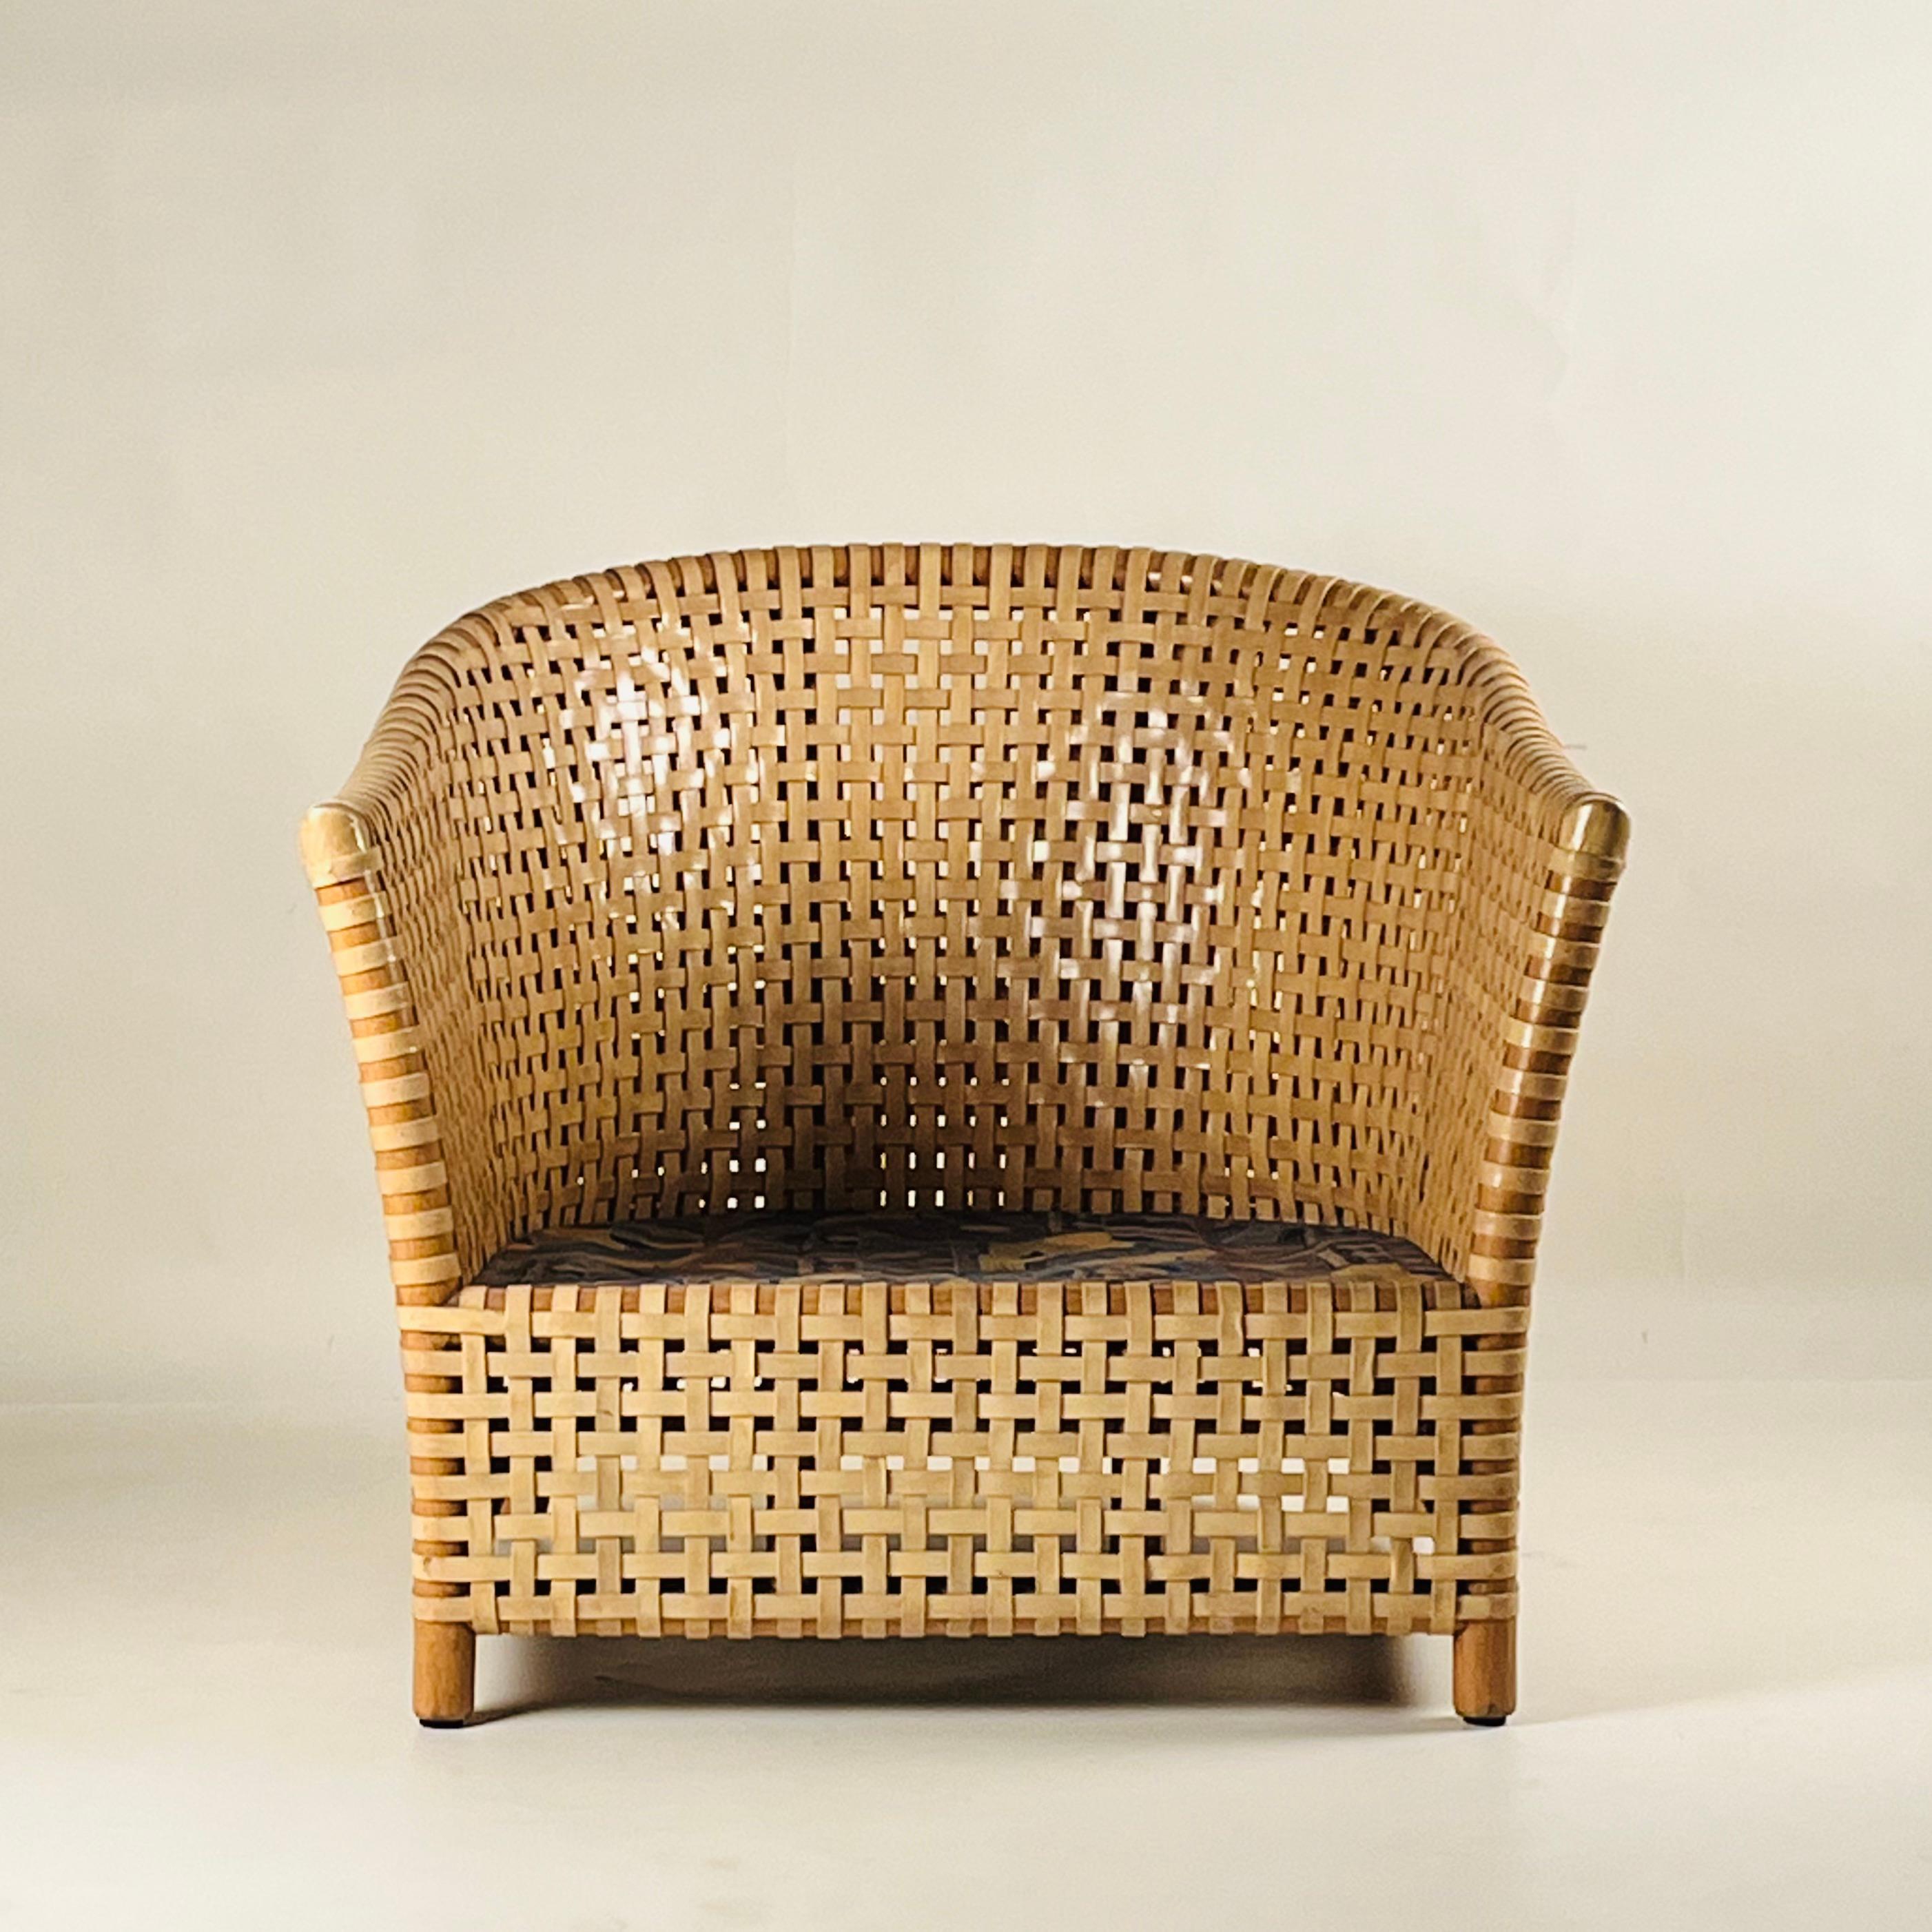 This unique piece features a woven leather strap design that evokes the distinct style of the 1980s. While already comfortable in its current form, it has great potential for new upholstery that will only enhance its appeal. This armchair doesn't